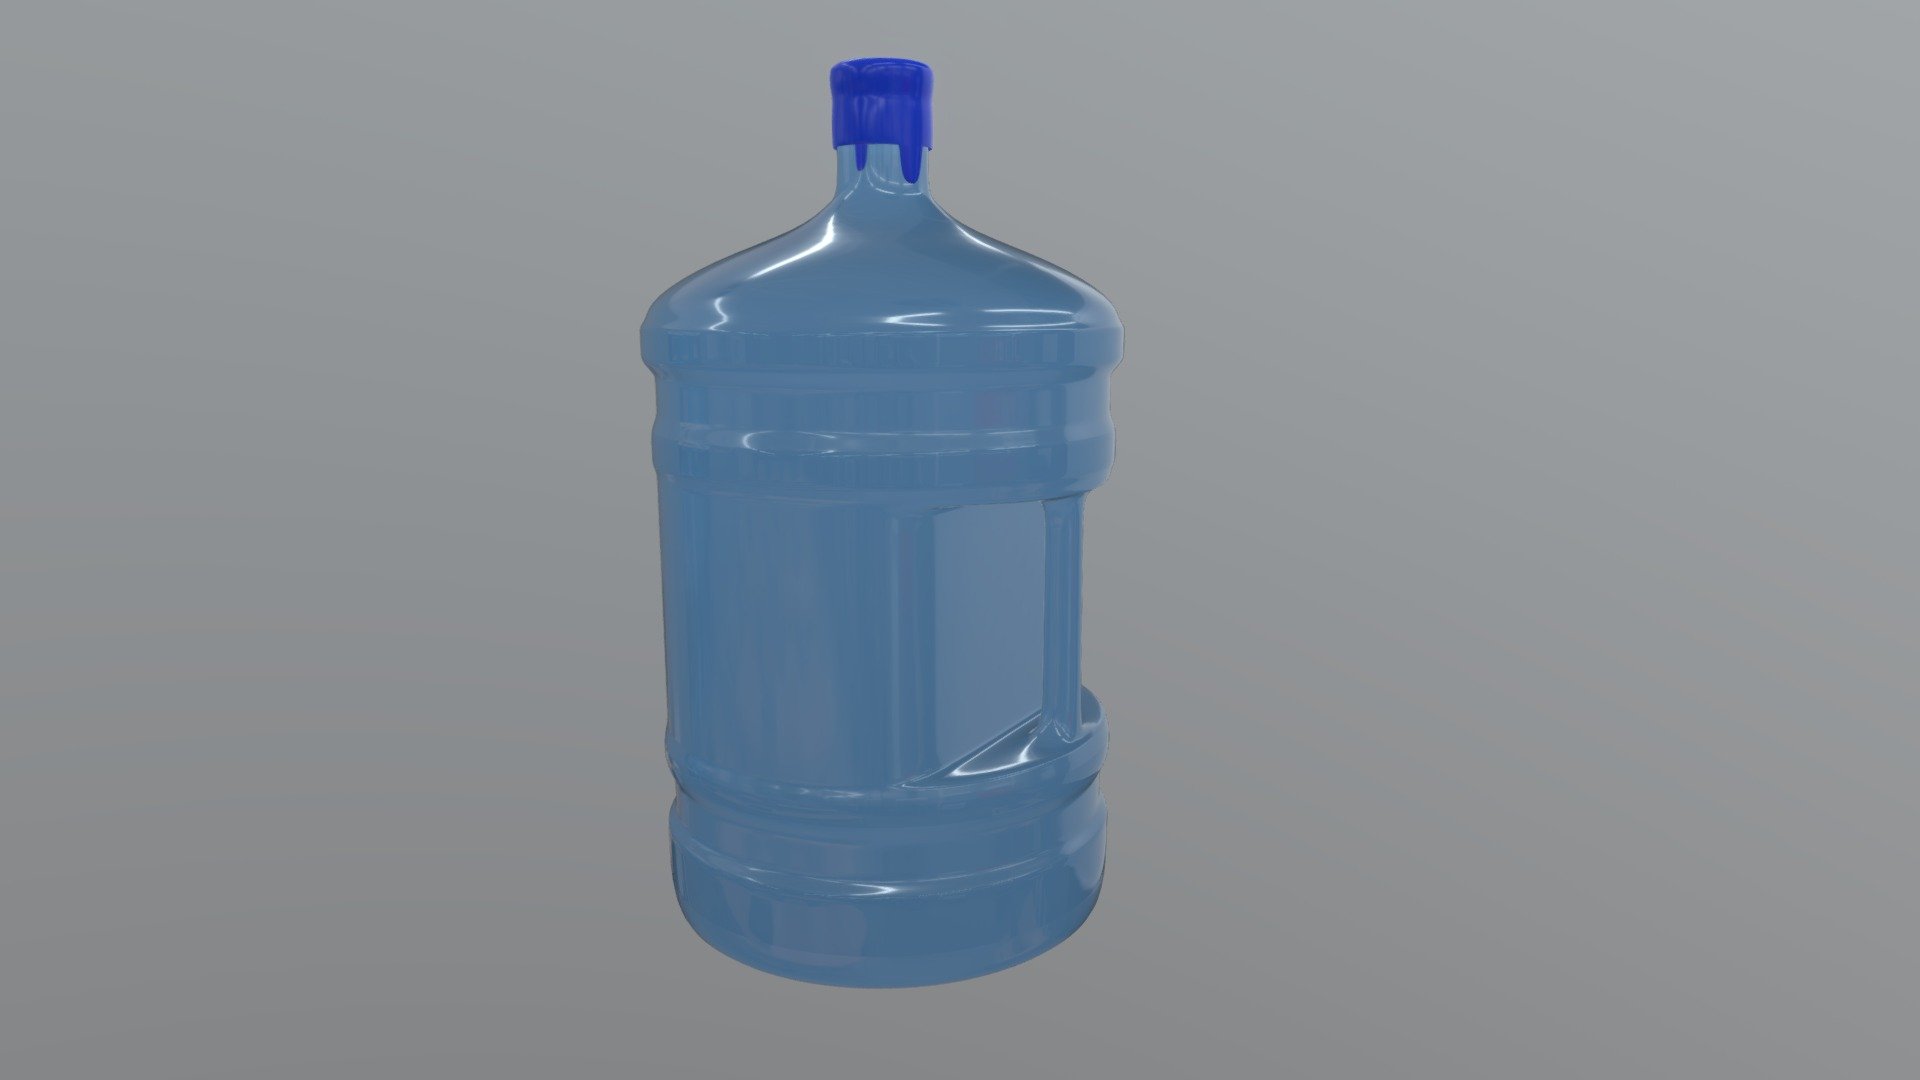 Realistic Water Bottle for your Interior House or Office Visualisation. Simple Material used. Easy to use in your Archviz Project or any game engine also like Unreal Engine or Unity 3d model